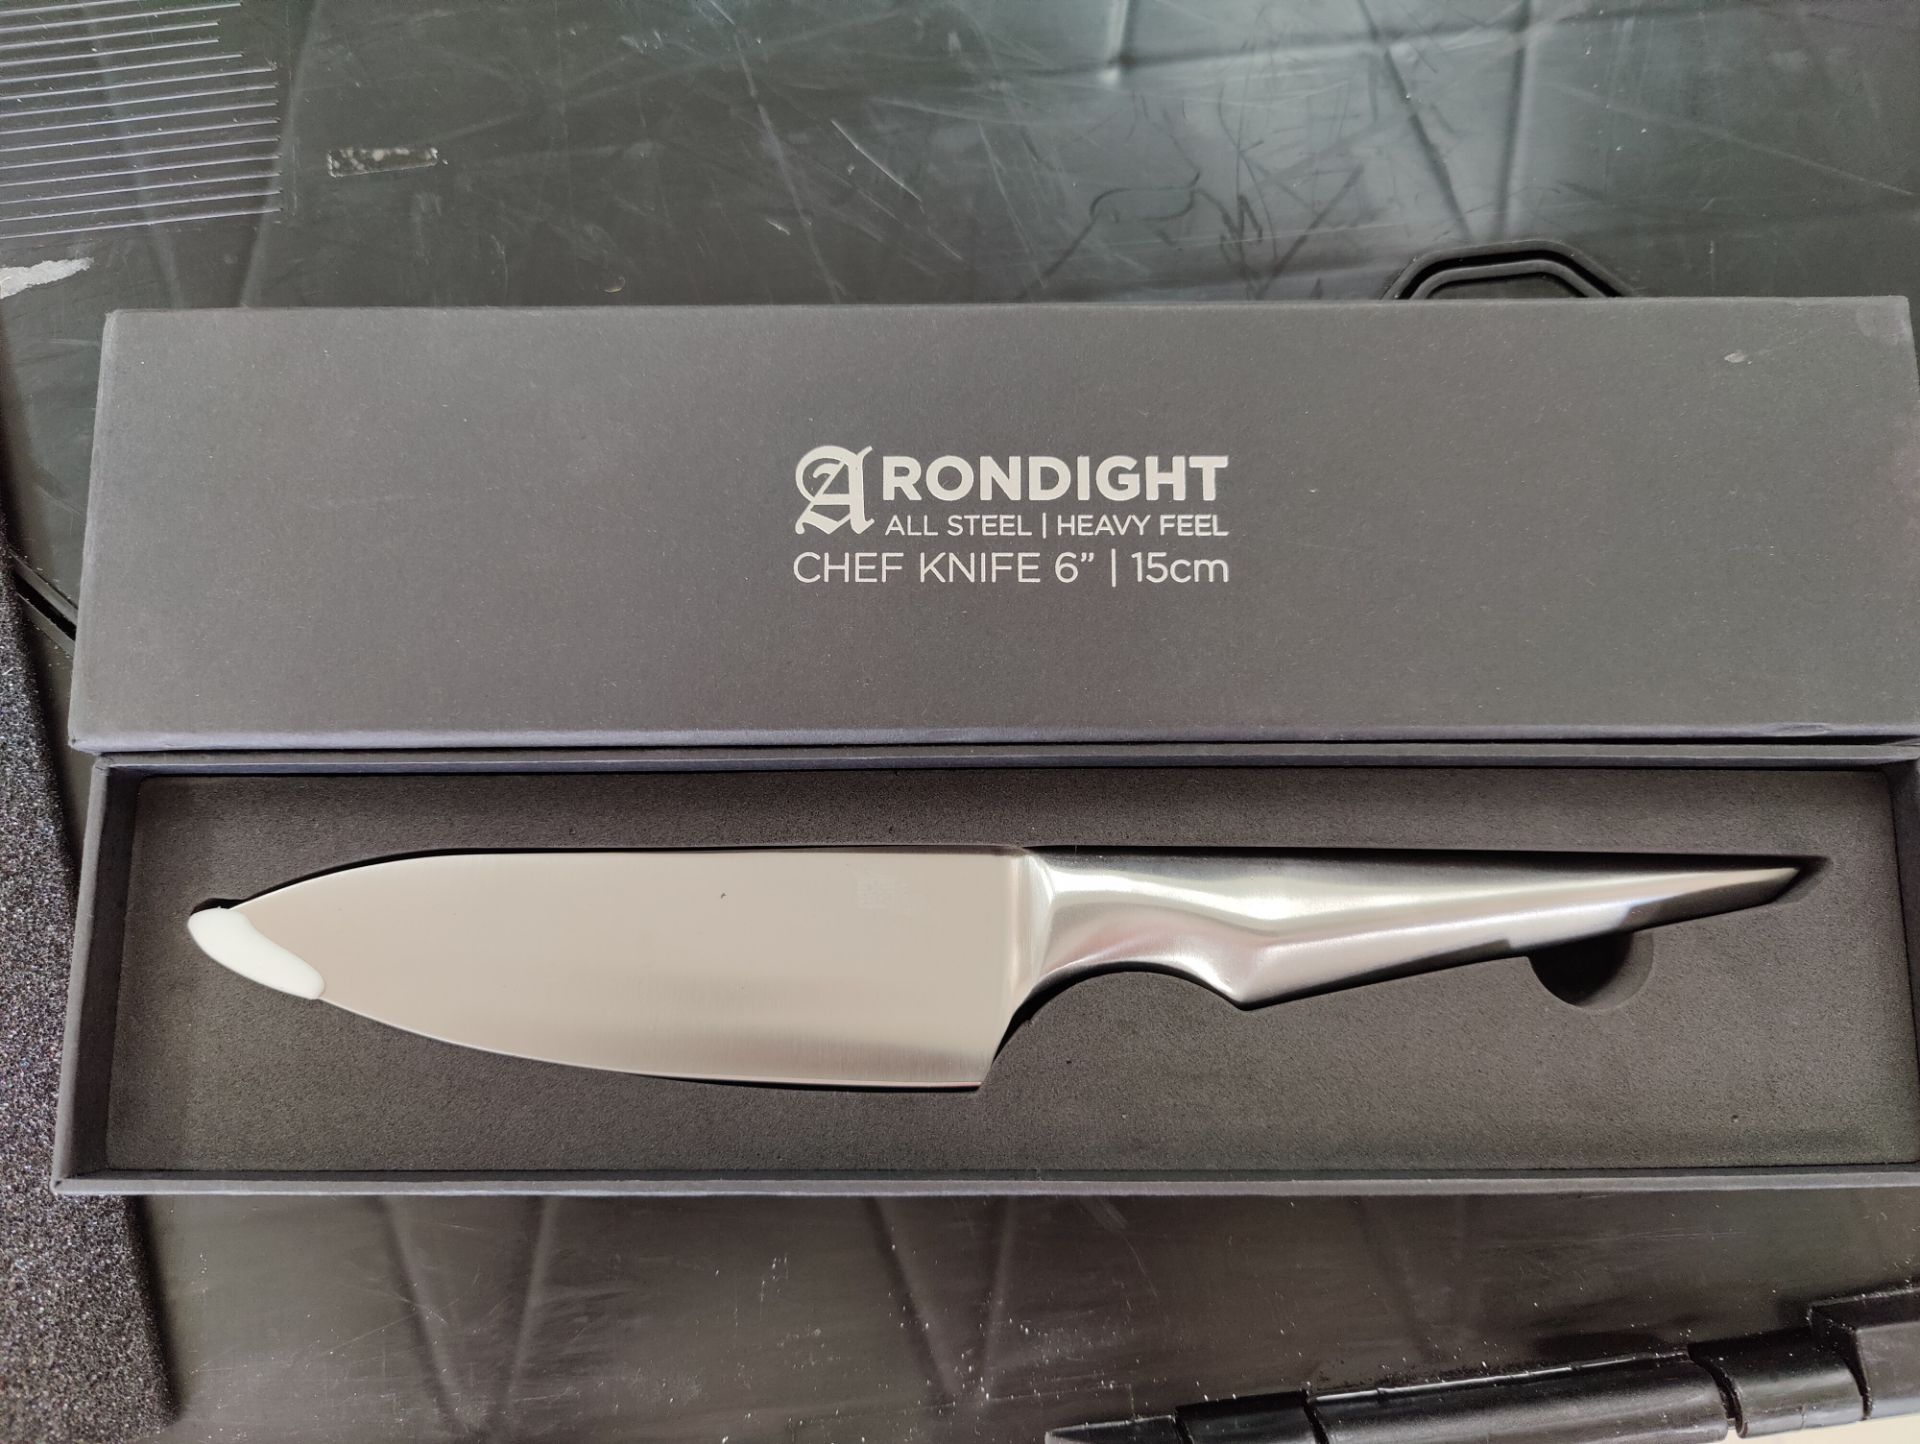 Arondight All Steel Chef Knife 6" - Image 2 of 2